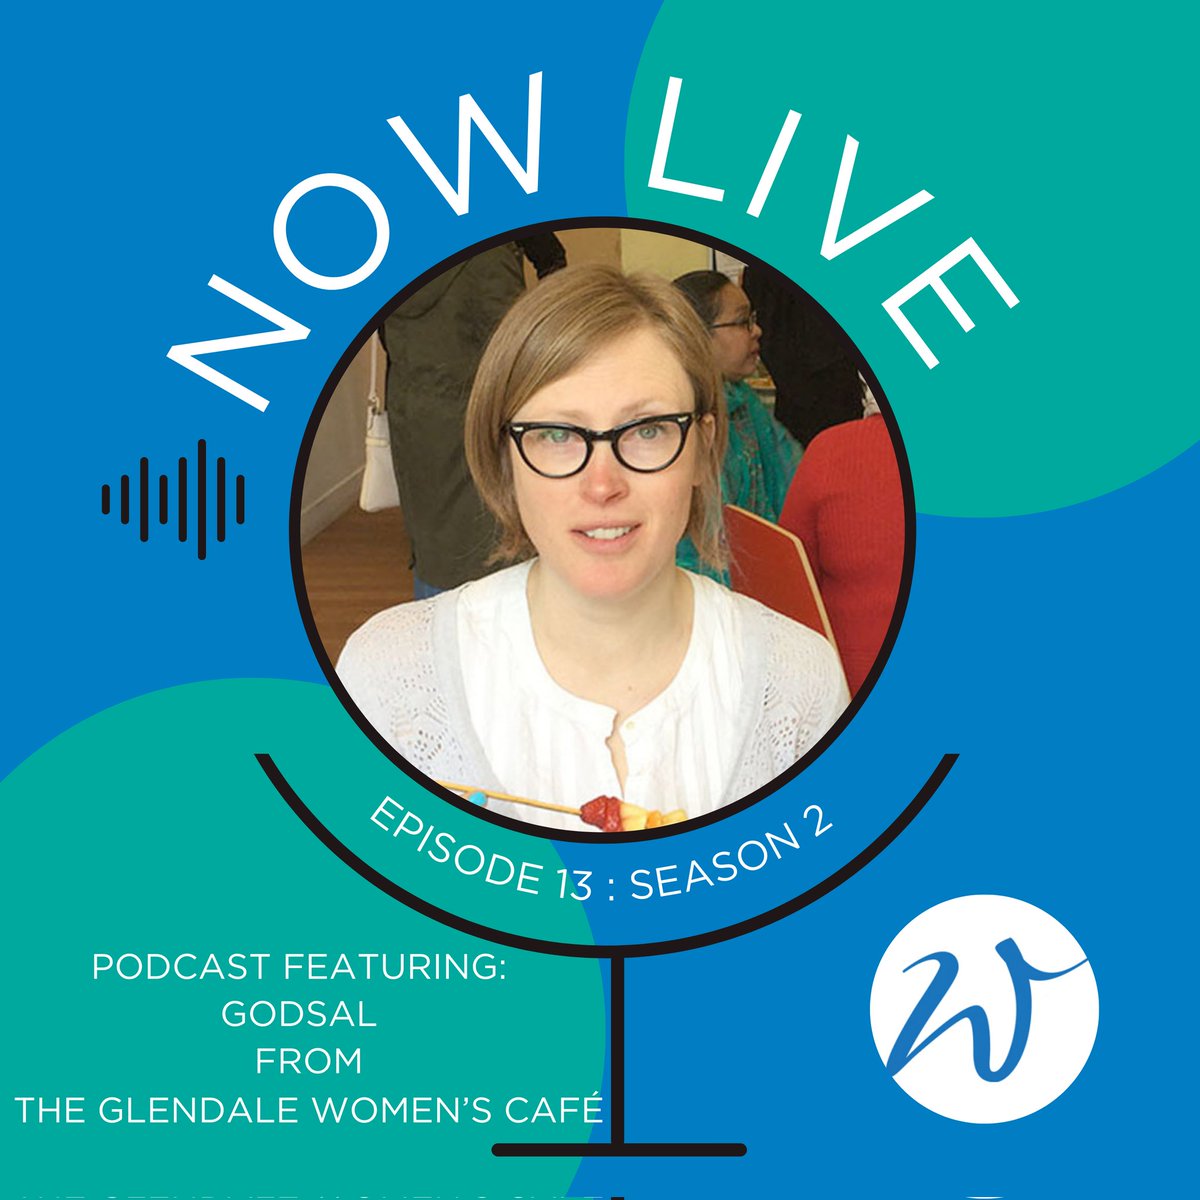 We are delighted to announce that season 2 of our podcast is LIVE! The Glendale Women's Café Project is creating a cohesive neighbourhood in Pollokshields by empowering local women. Have a listen to find out a little more: womensfundscotland.org/project-storie… #SheMeansBusiness